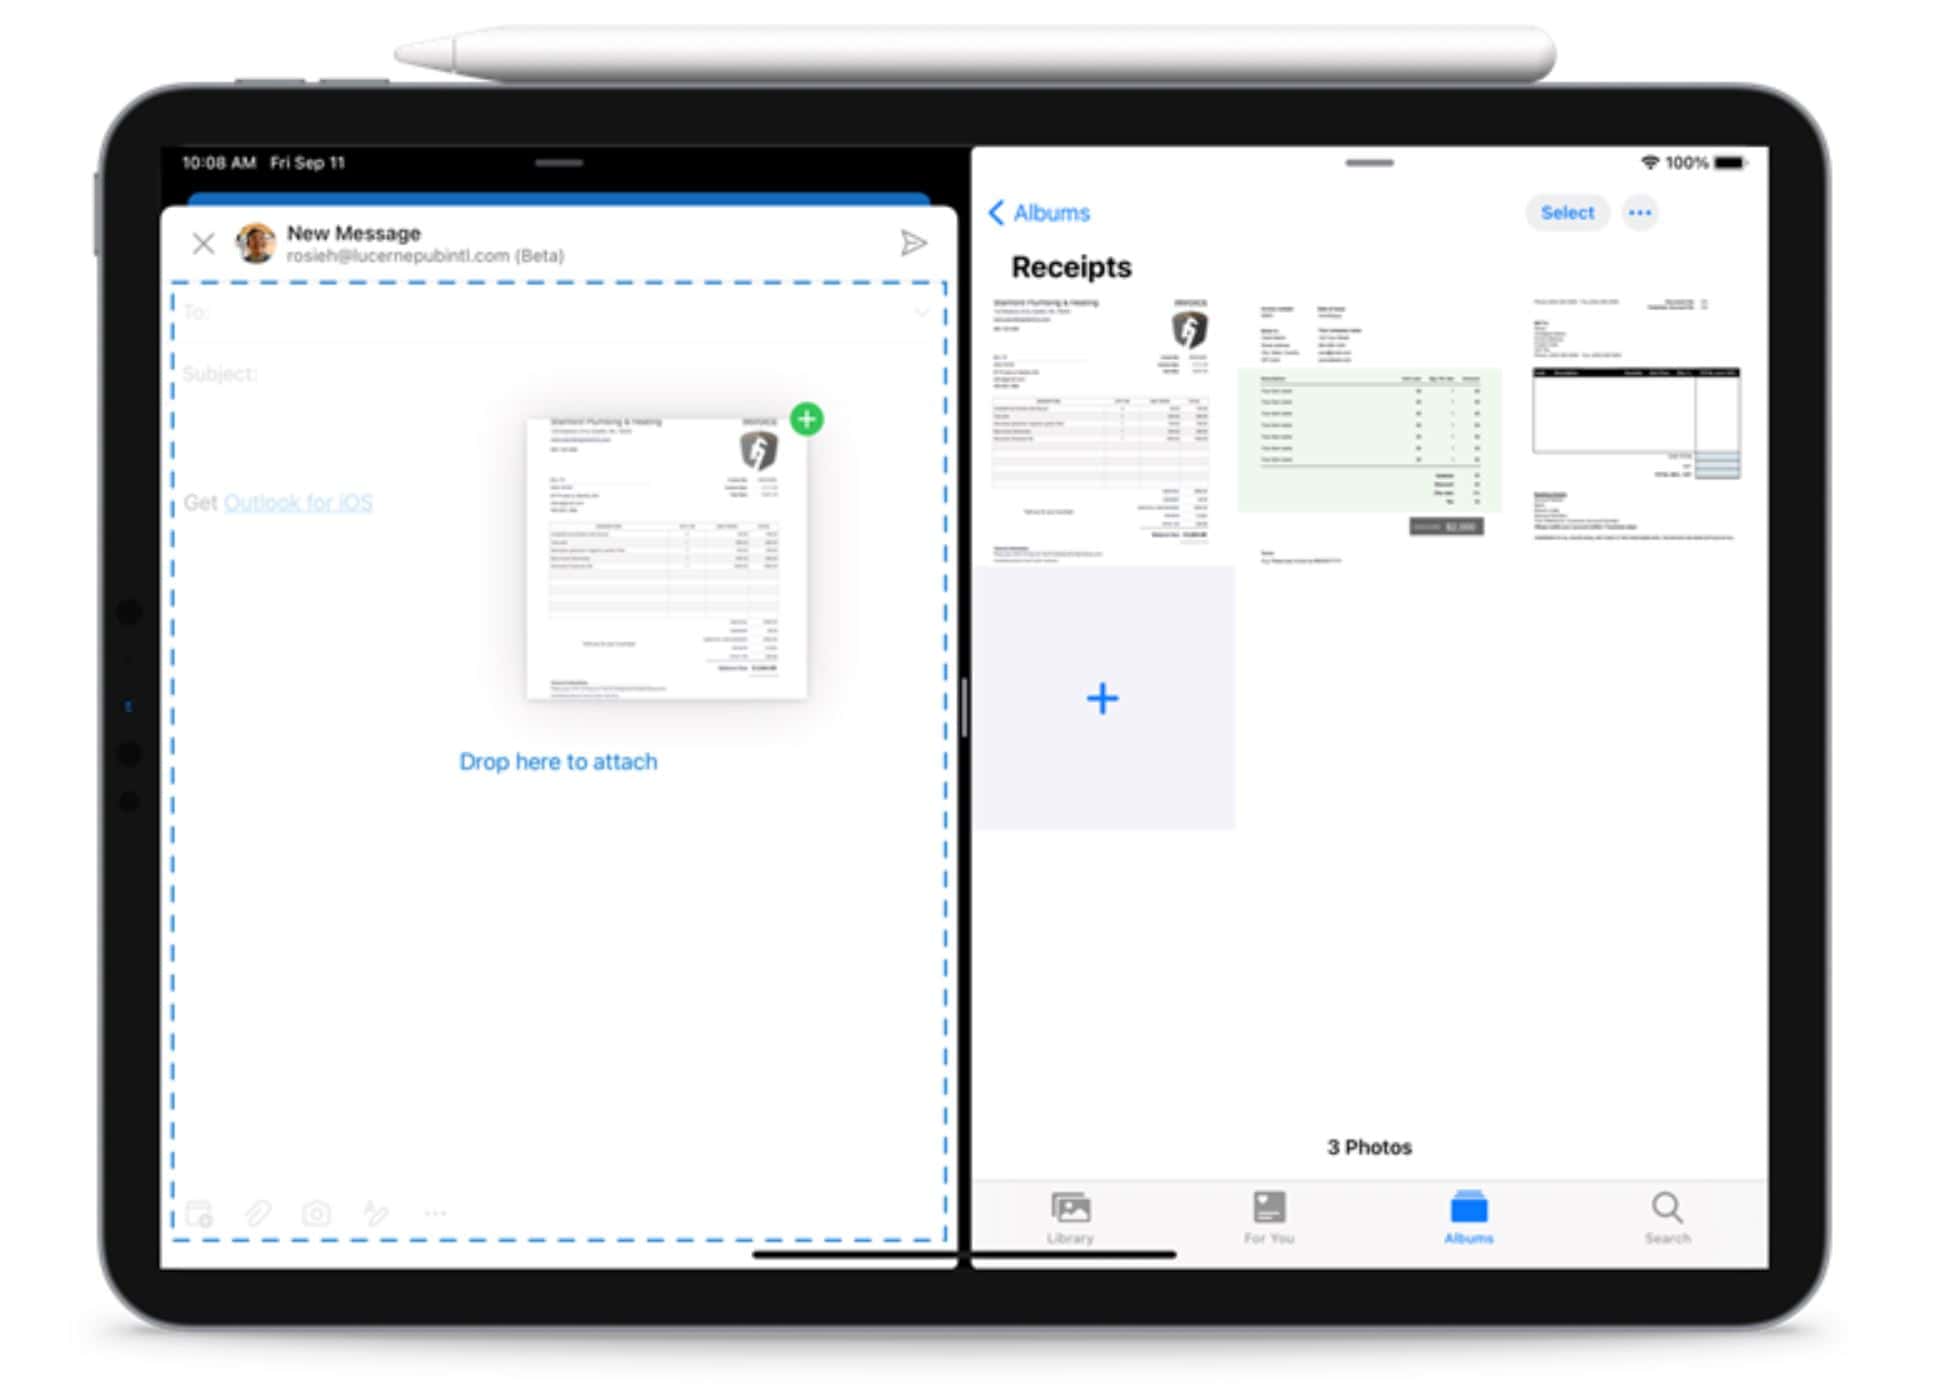 Microsoft Outlook app for iPad will soon support handwritten text and delegate mailboxes